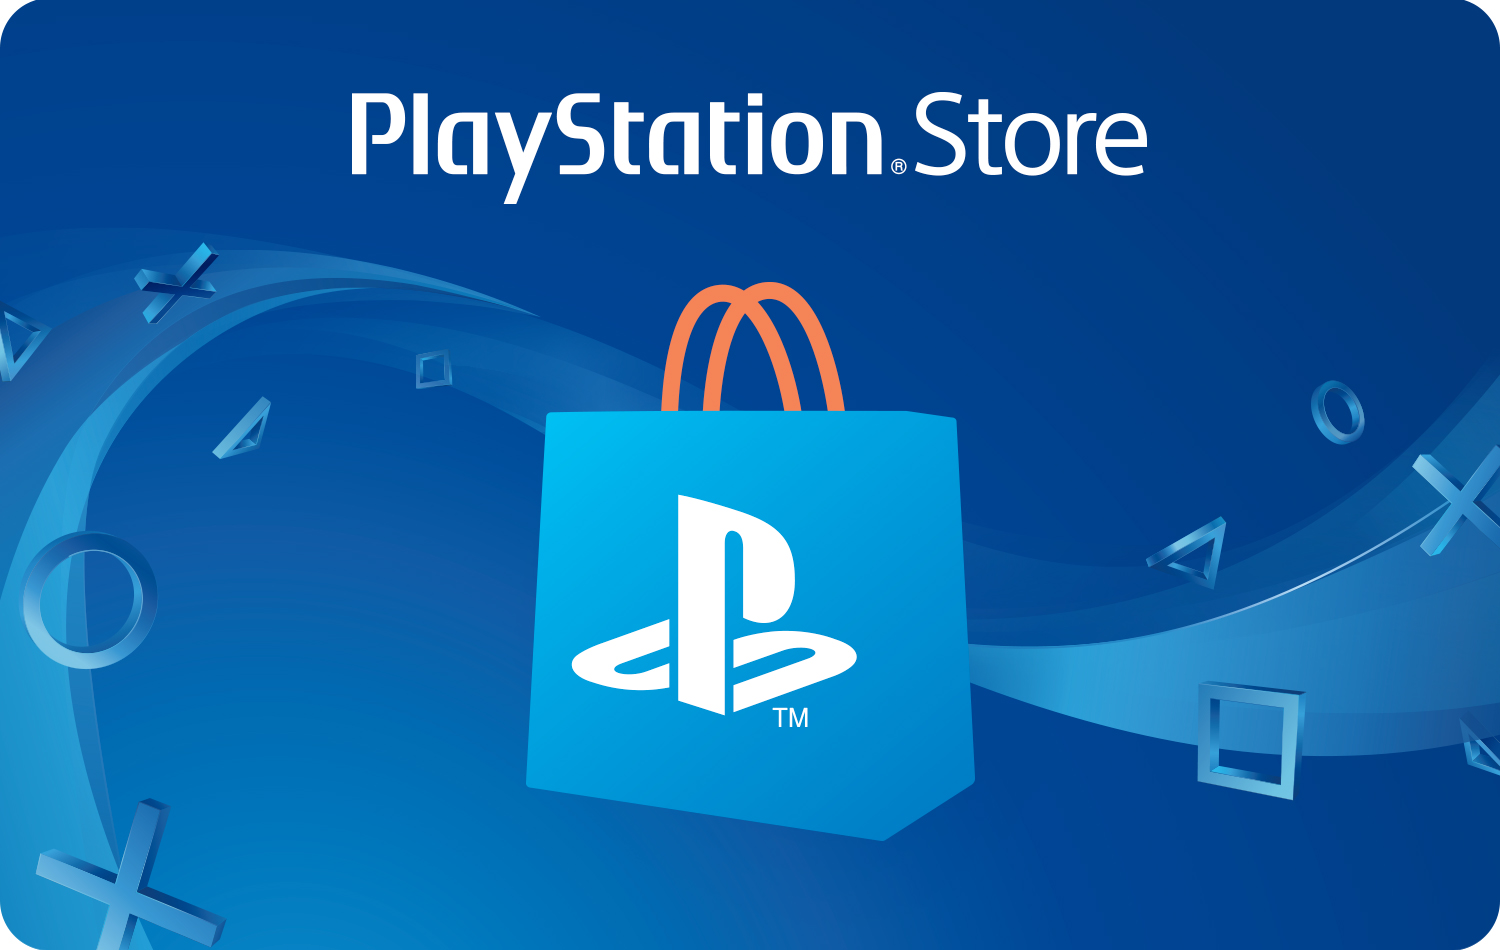 ps5 playstation store